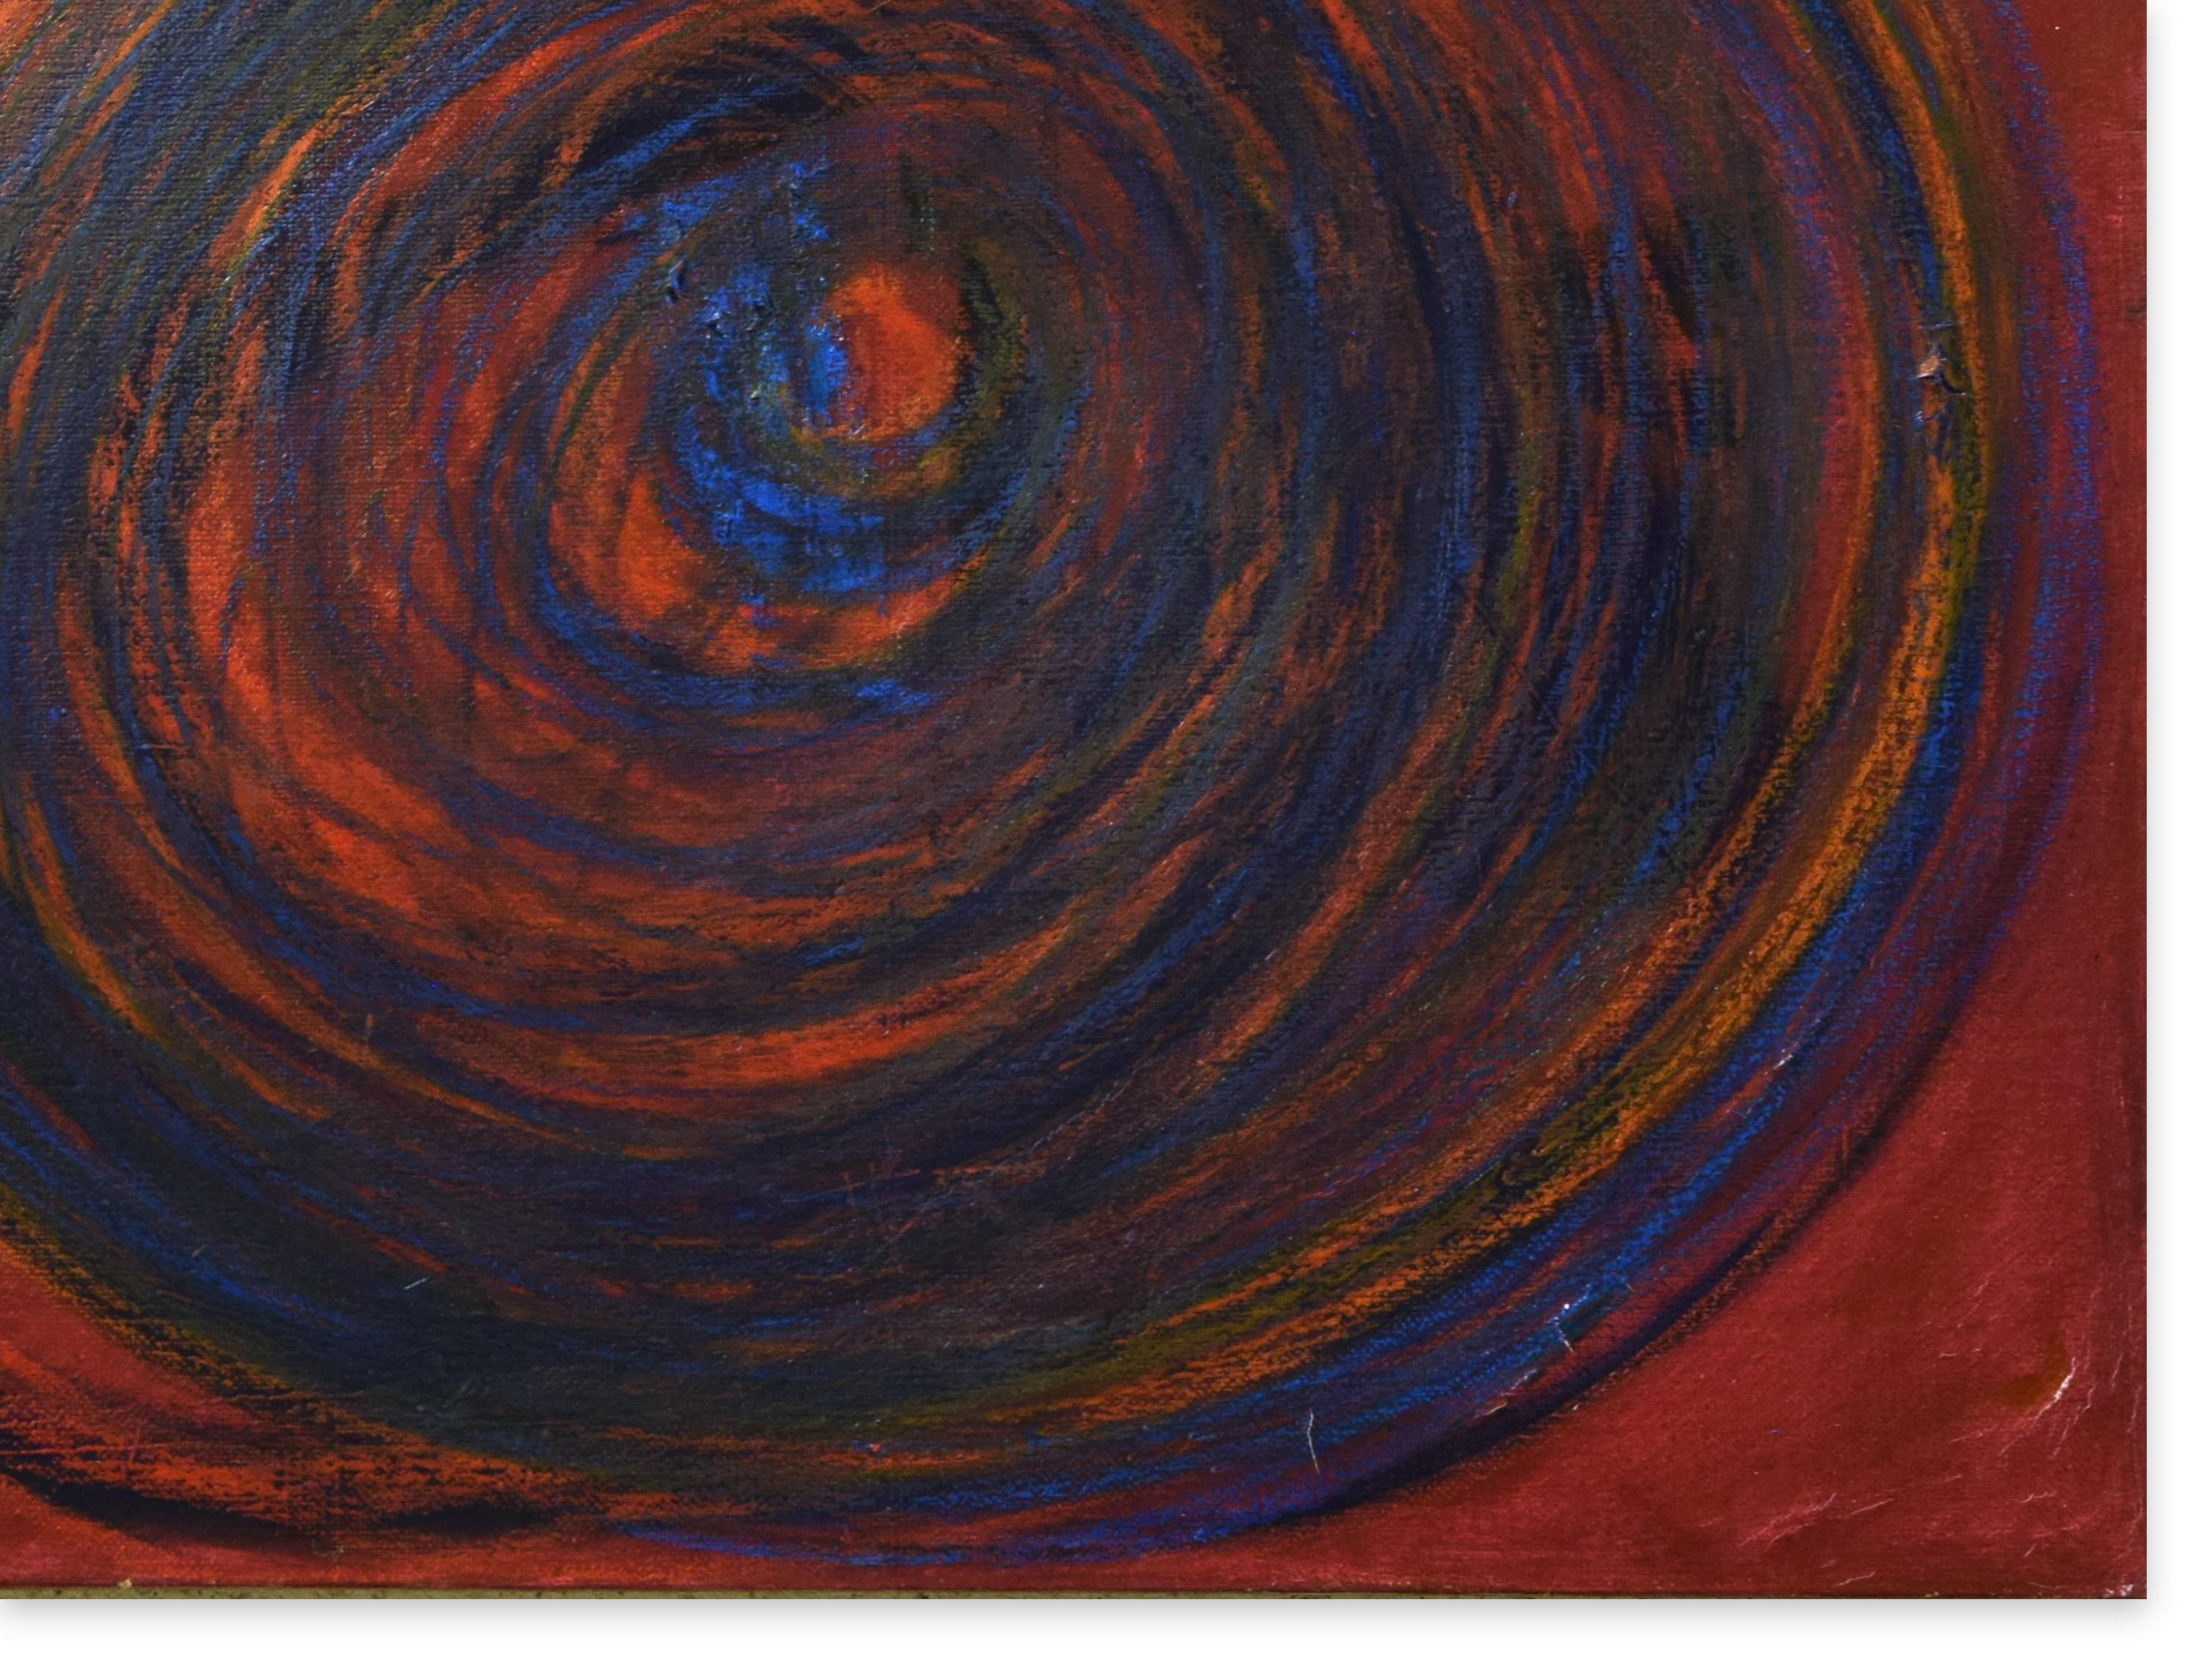 Eclipse is an original oil painting on canvas, realized in 2016 by the Italian artist Giorgio Lo Fermo.

Hand-signed on the back.

This is an interesting contemporary artwork with an abstract composition composed by concentric blue cobalt circles on